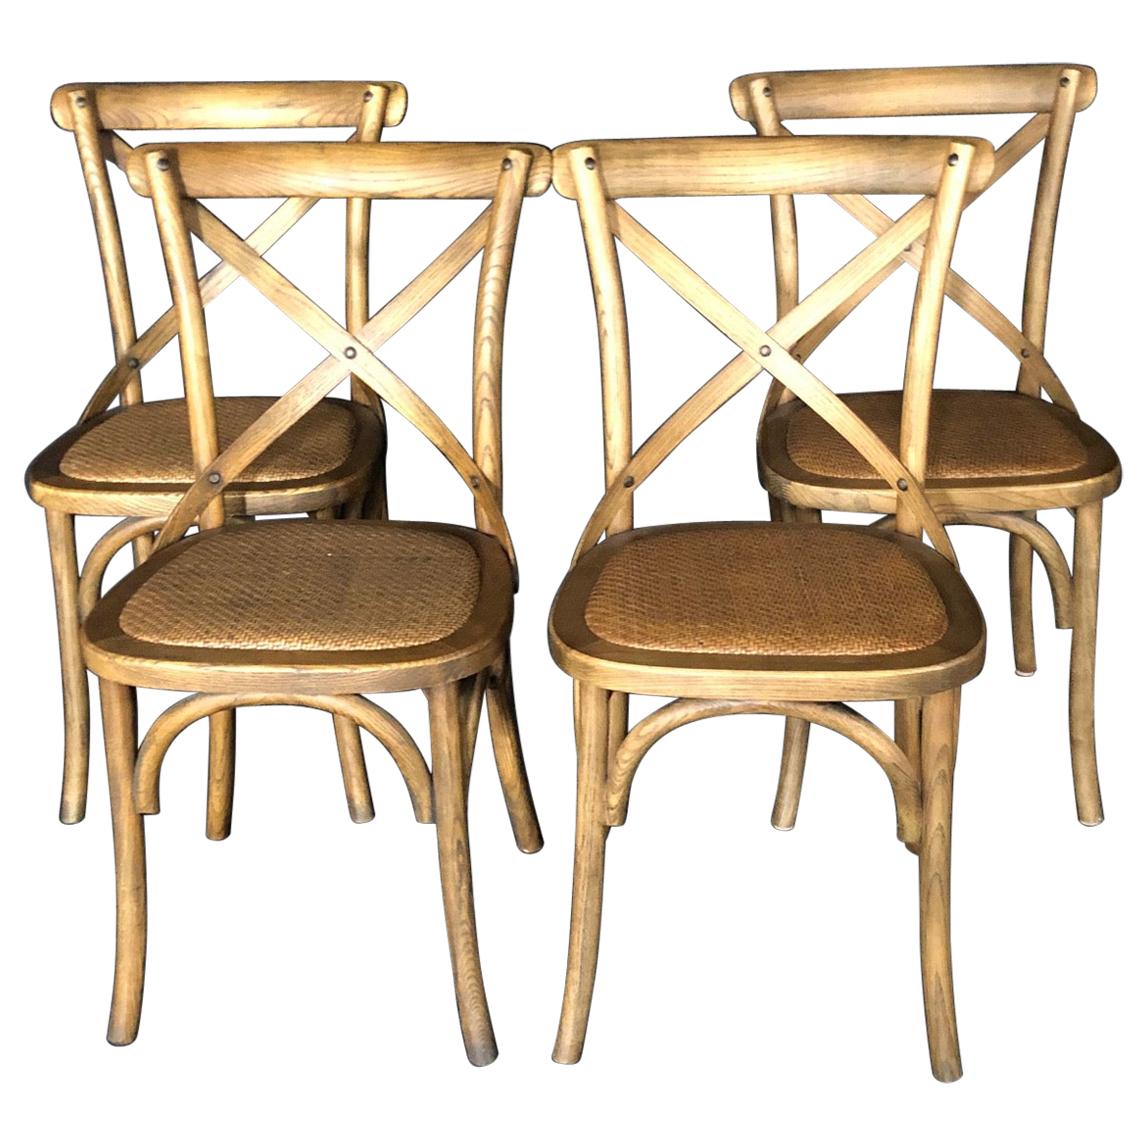 Set of Four Classic French Bentwood Bistro Chairs with Woven Seats